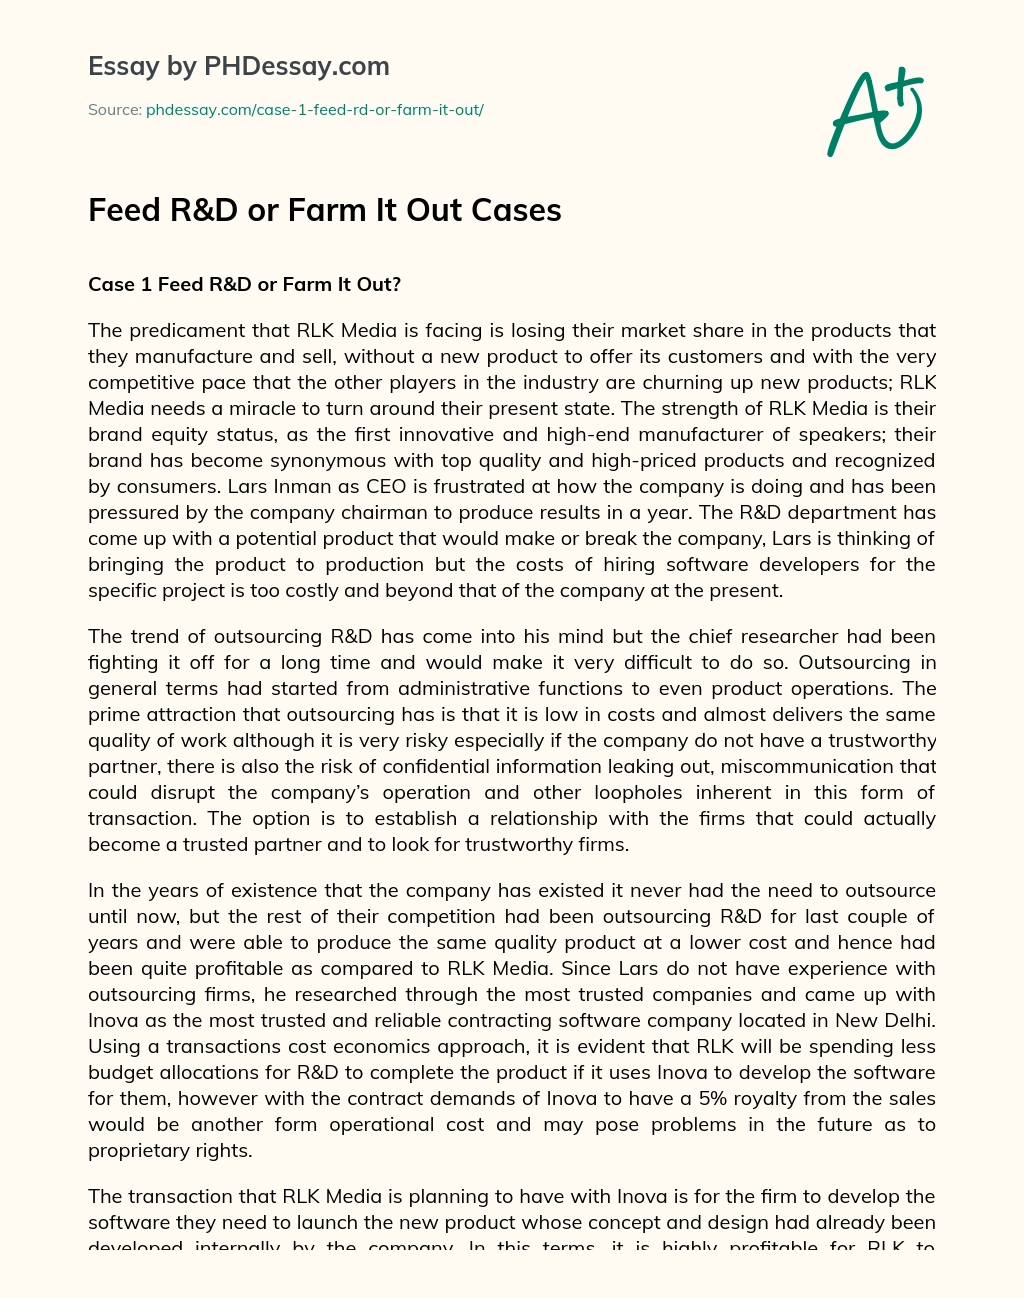 Feed R&D or Farm It Out Cases essay